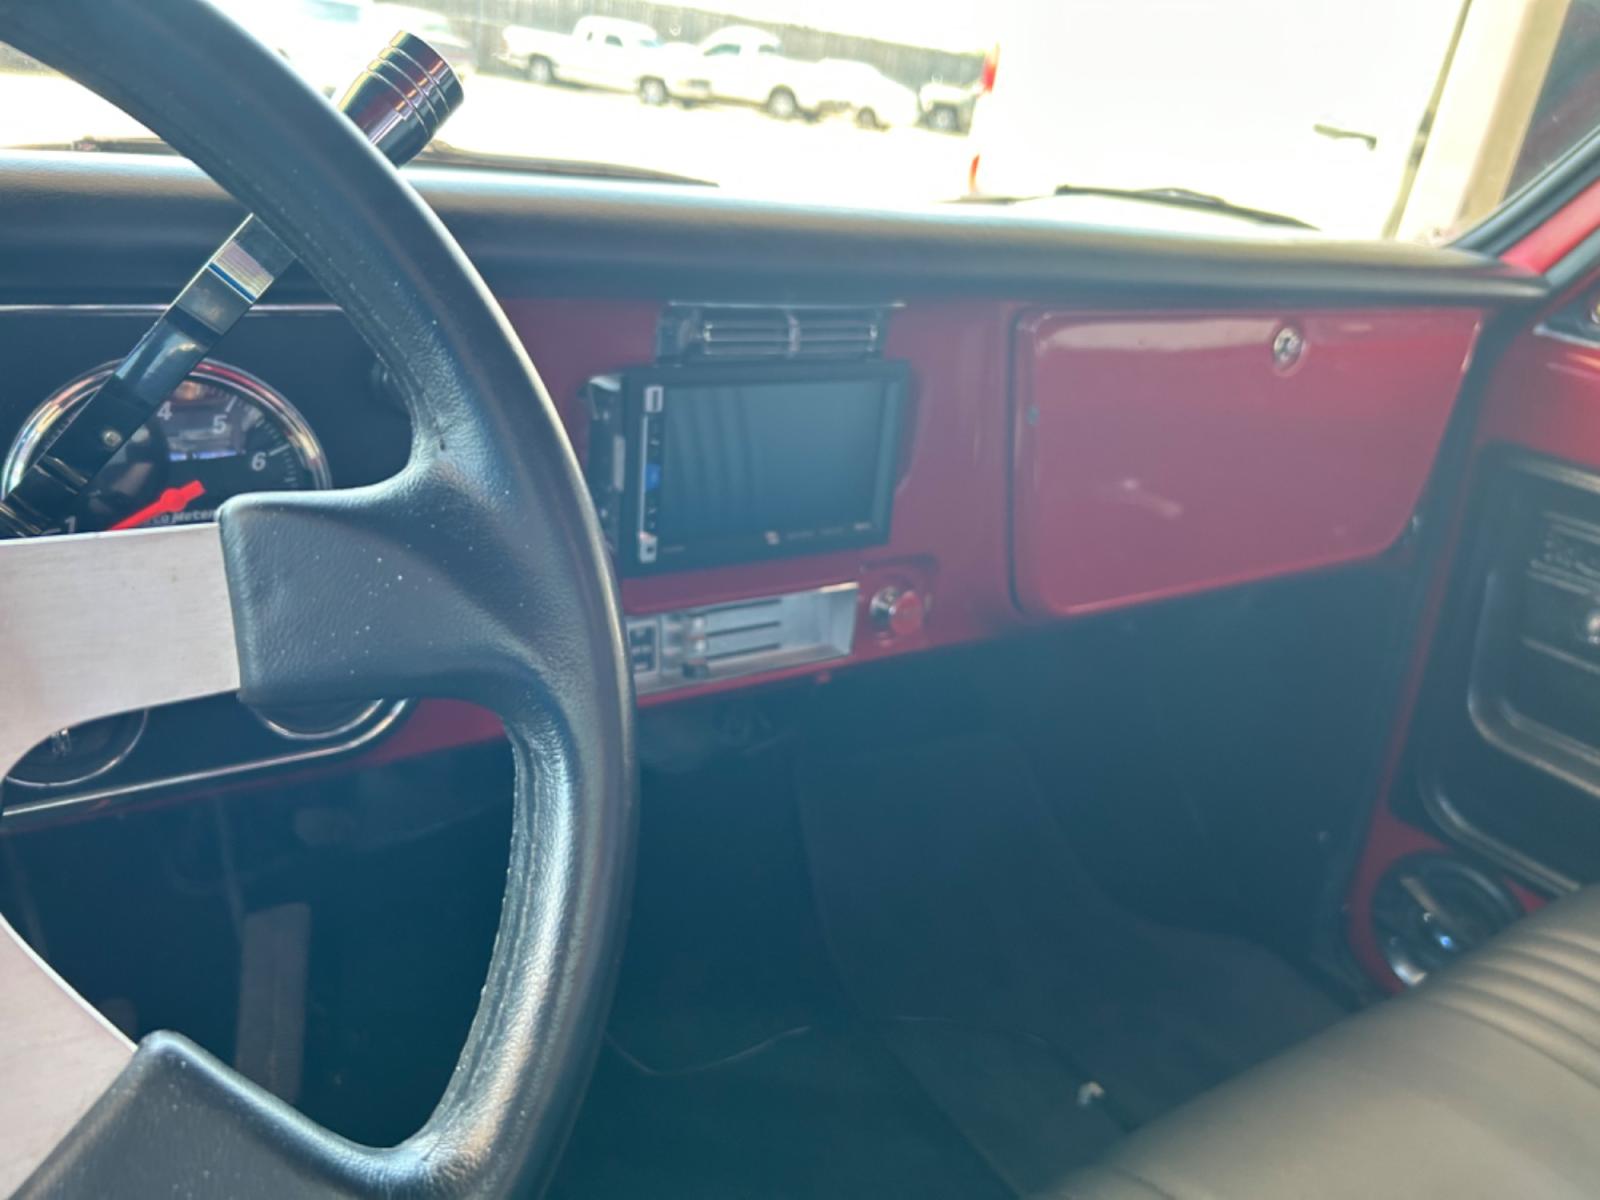 1972 Red Chevrolet C10 (CCE142A1201) , located at 1687 Business 35 S, New Braunfels, TX, 78130, (830) 625-7159, 29.655487, -98.051491 - Photo #9